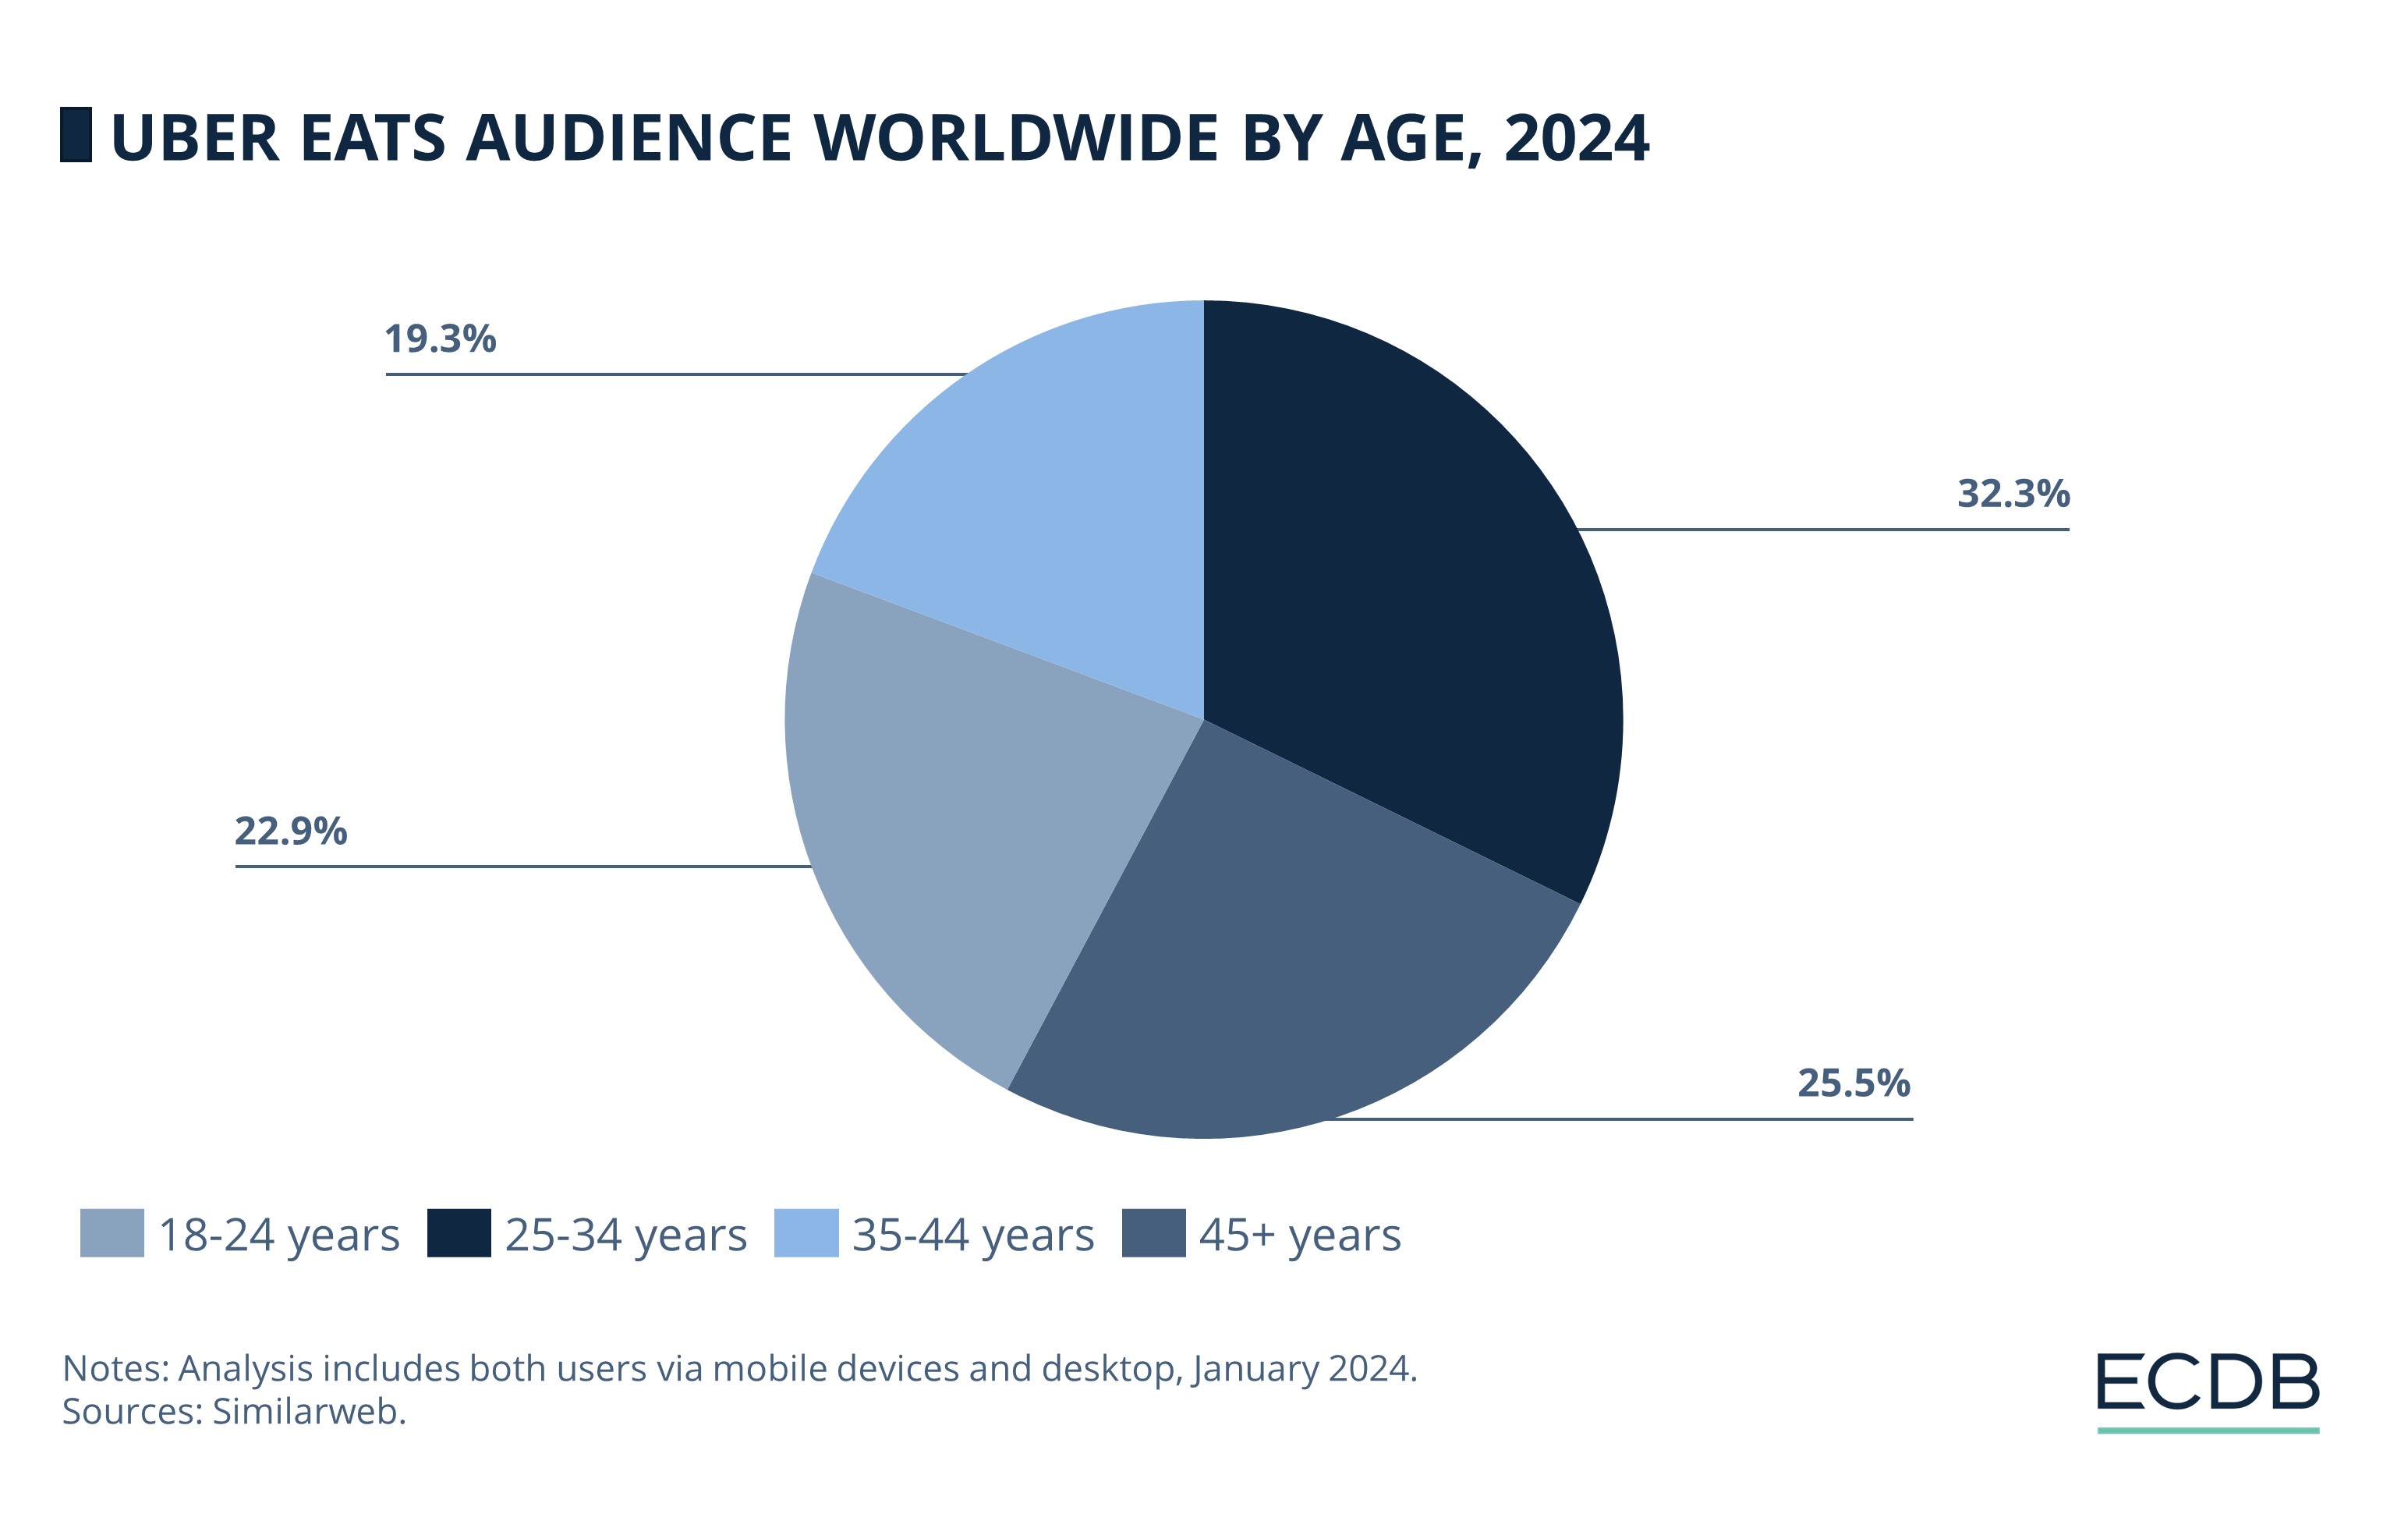 Uber Eats Audience Worldwide by Age, 2024